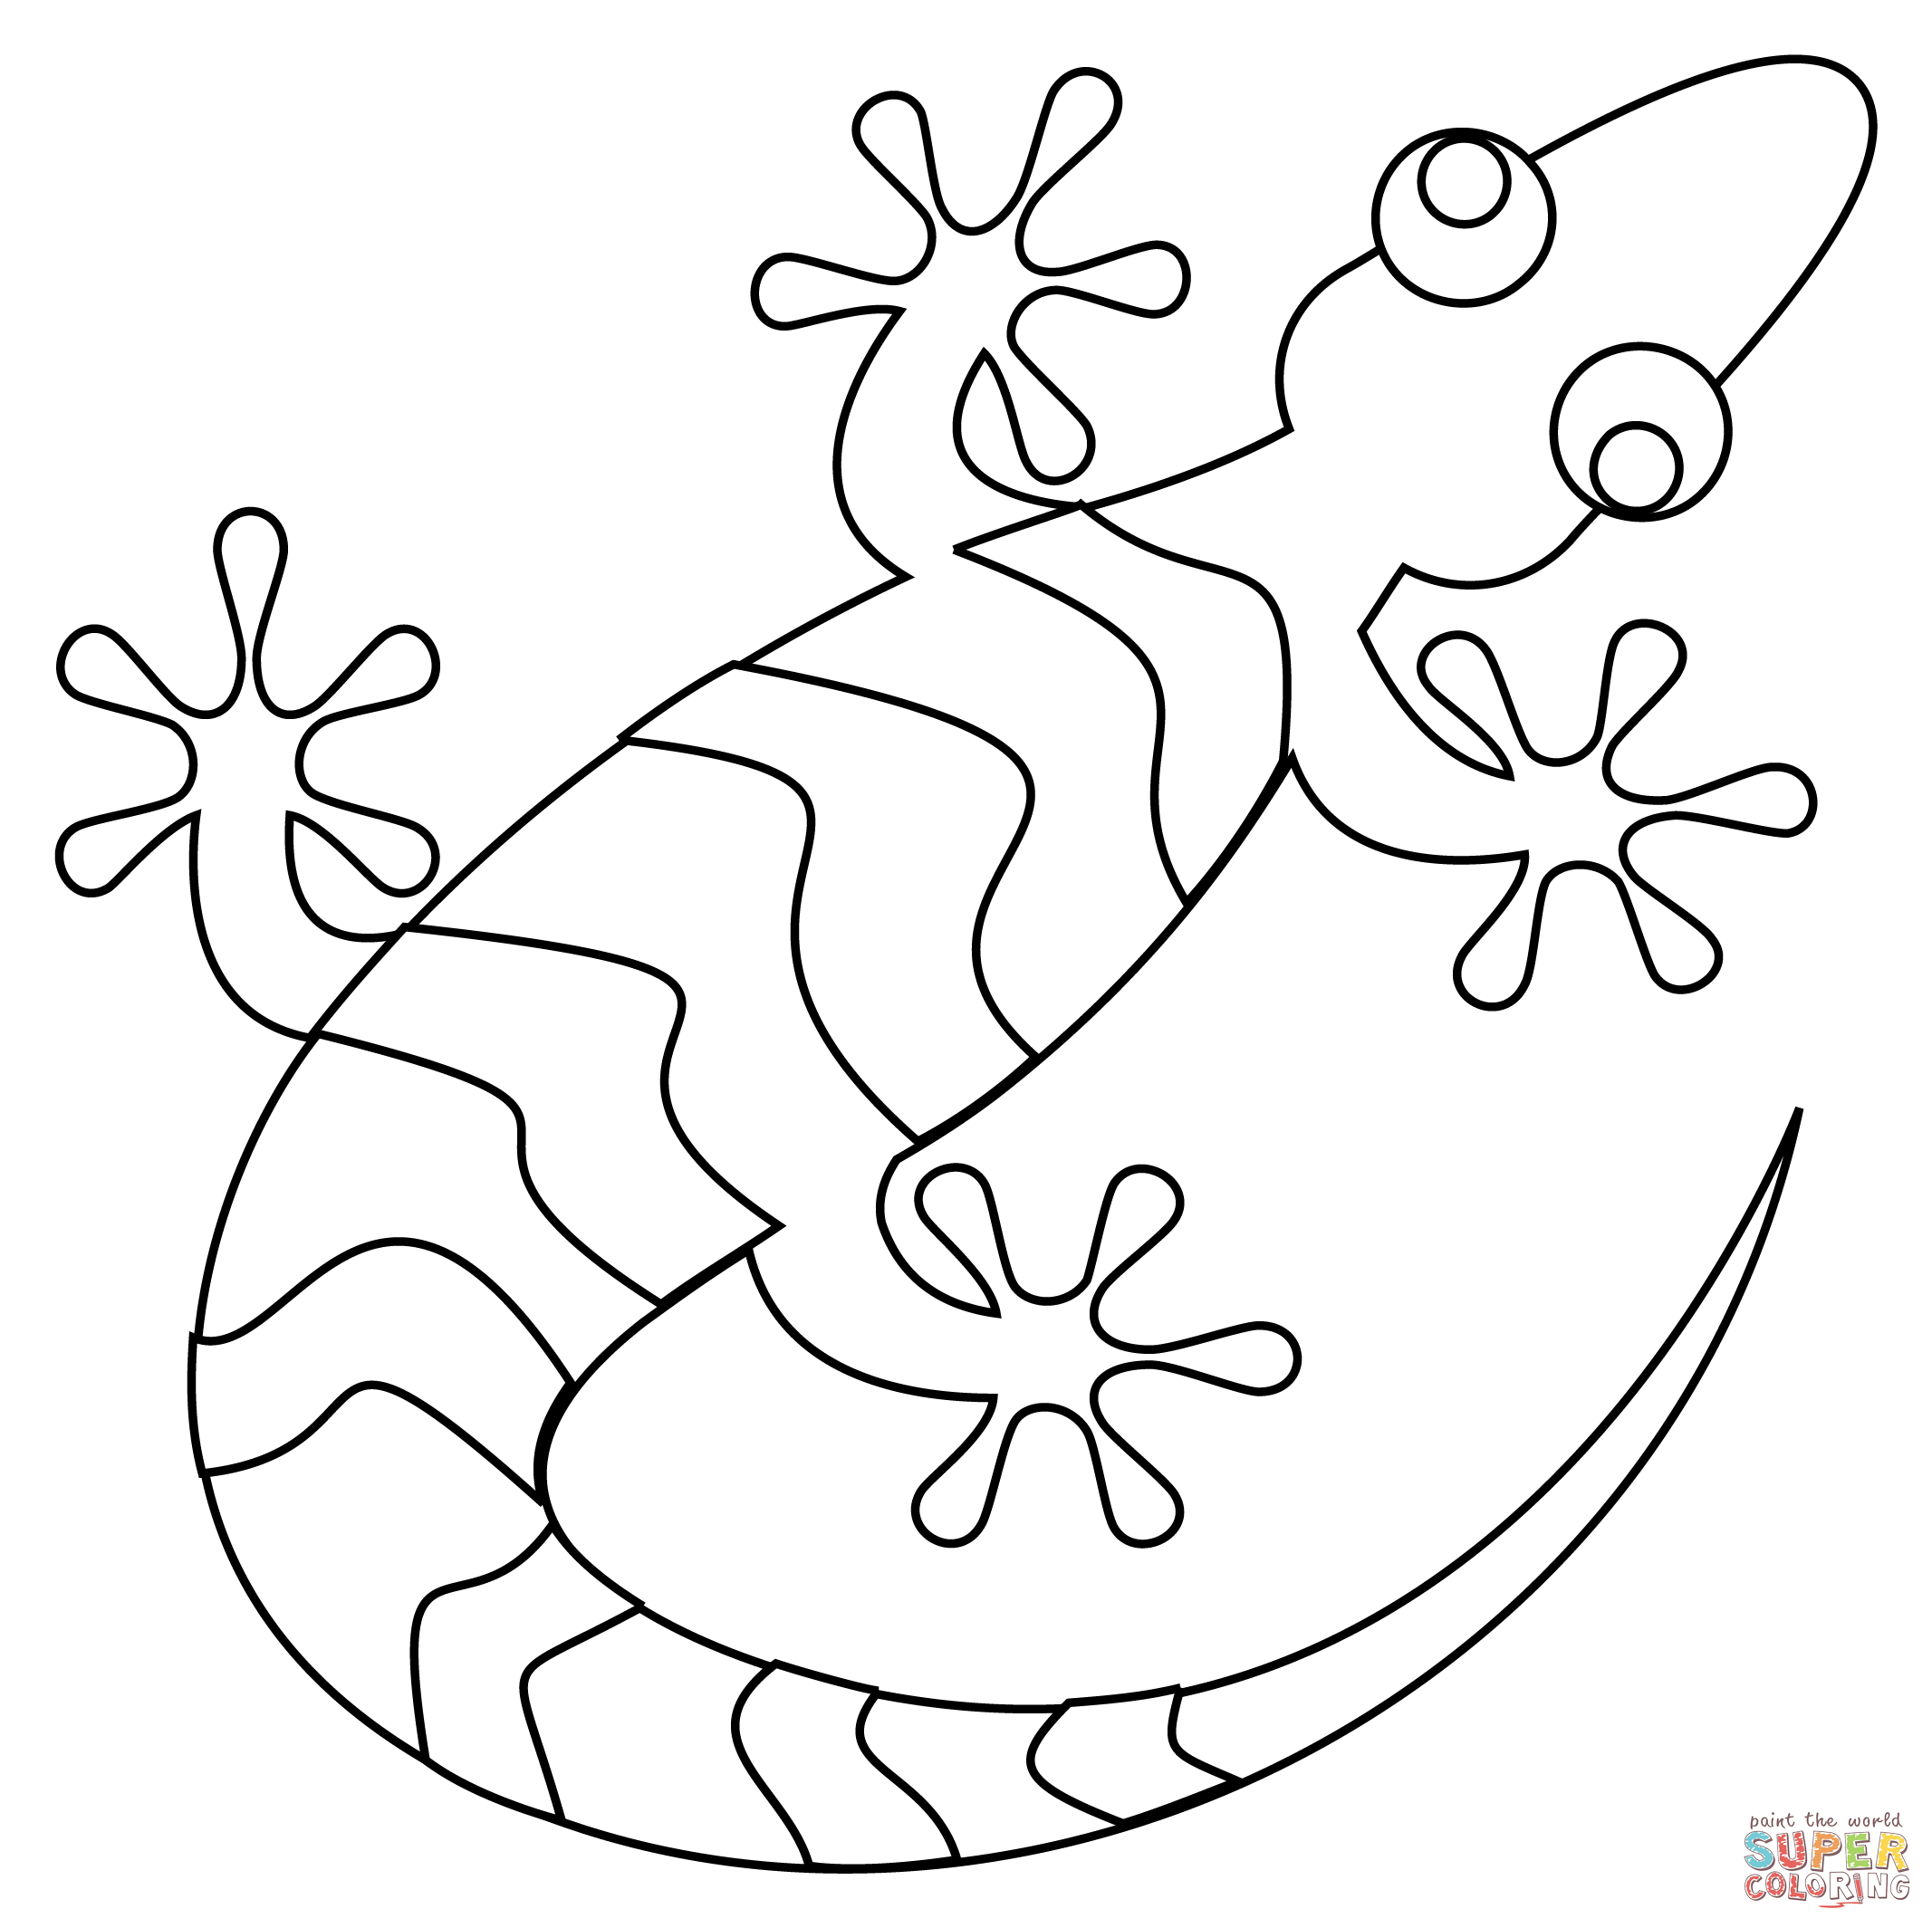 Lizard coloring page free printable coloring pages